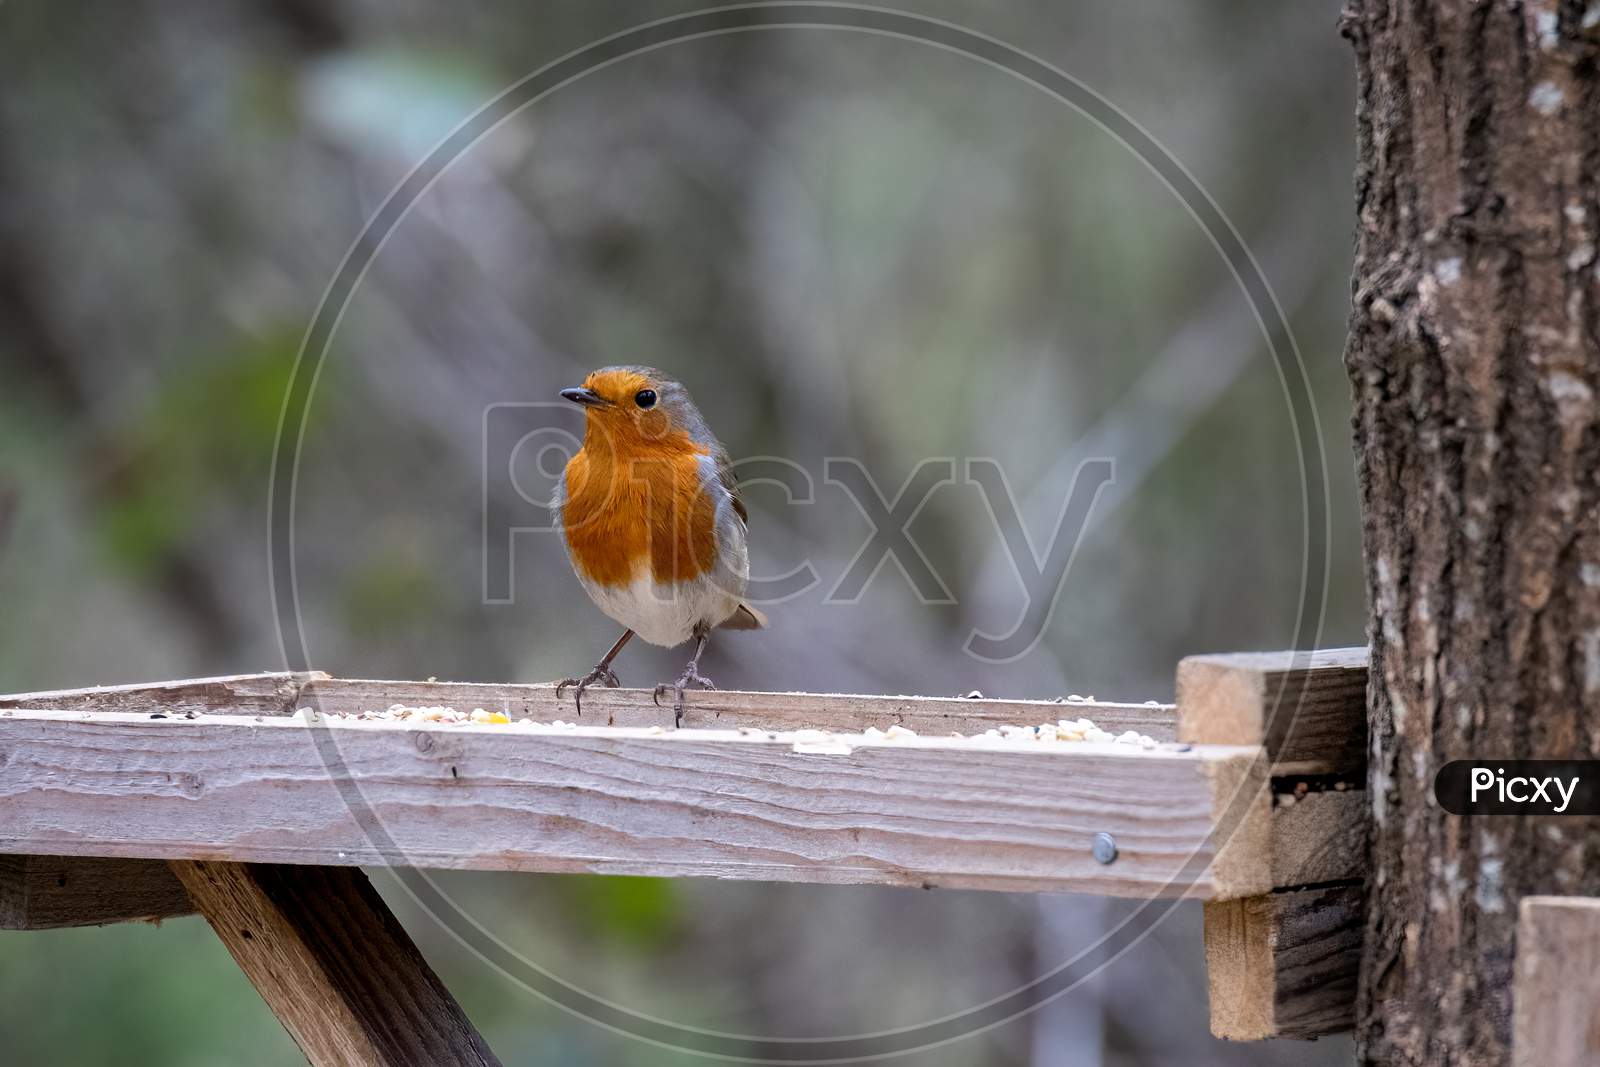 Close-Up Of An Alert Robin Standing On A Wooden Table